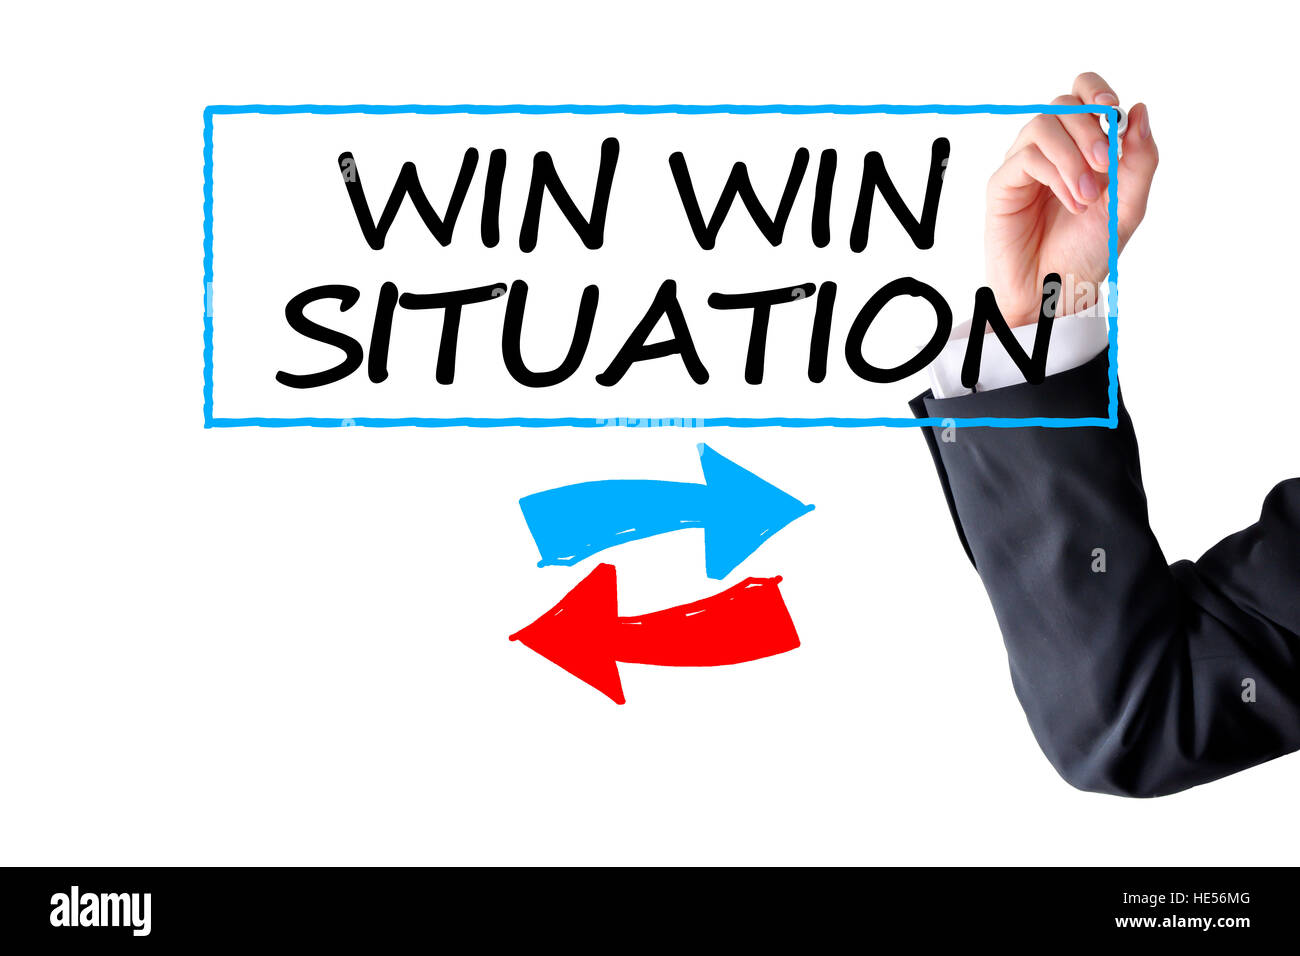 Win win situation Stock Photo